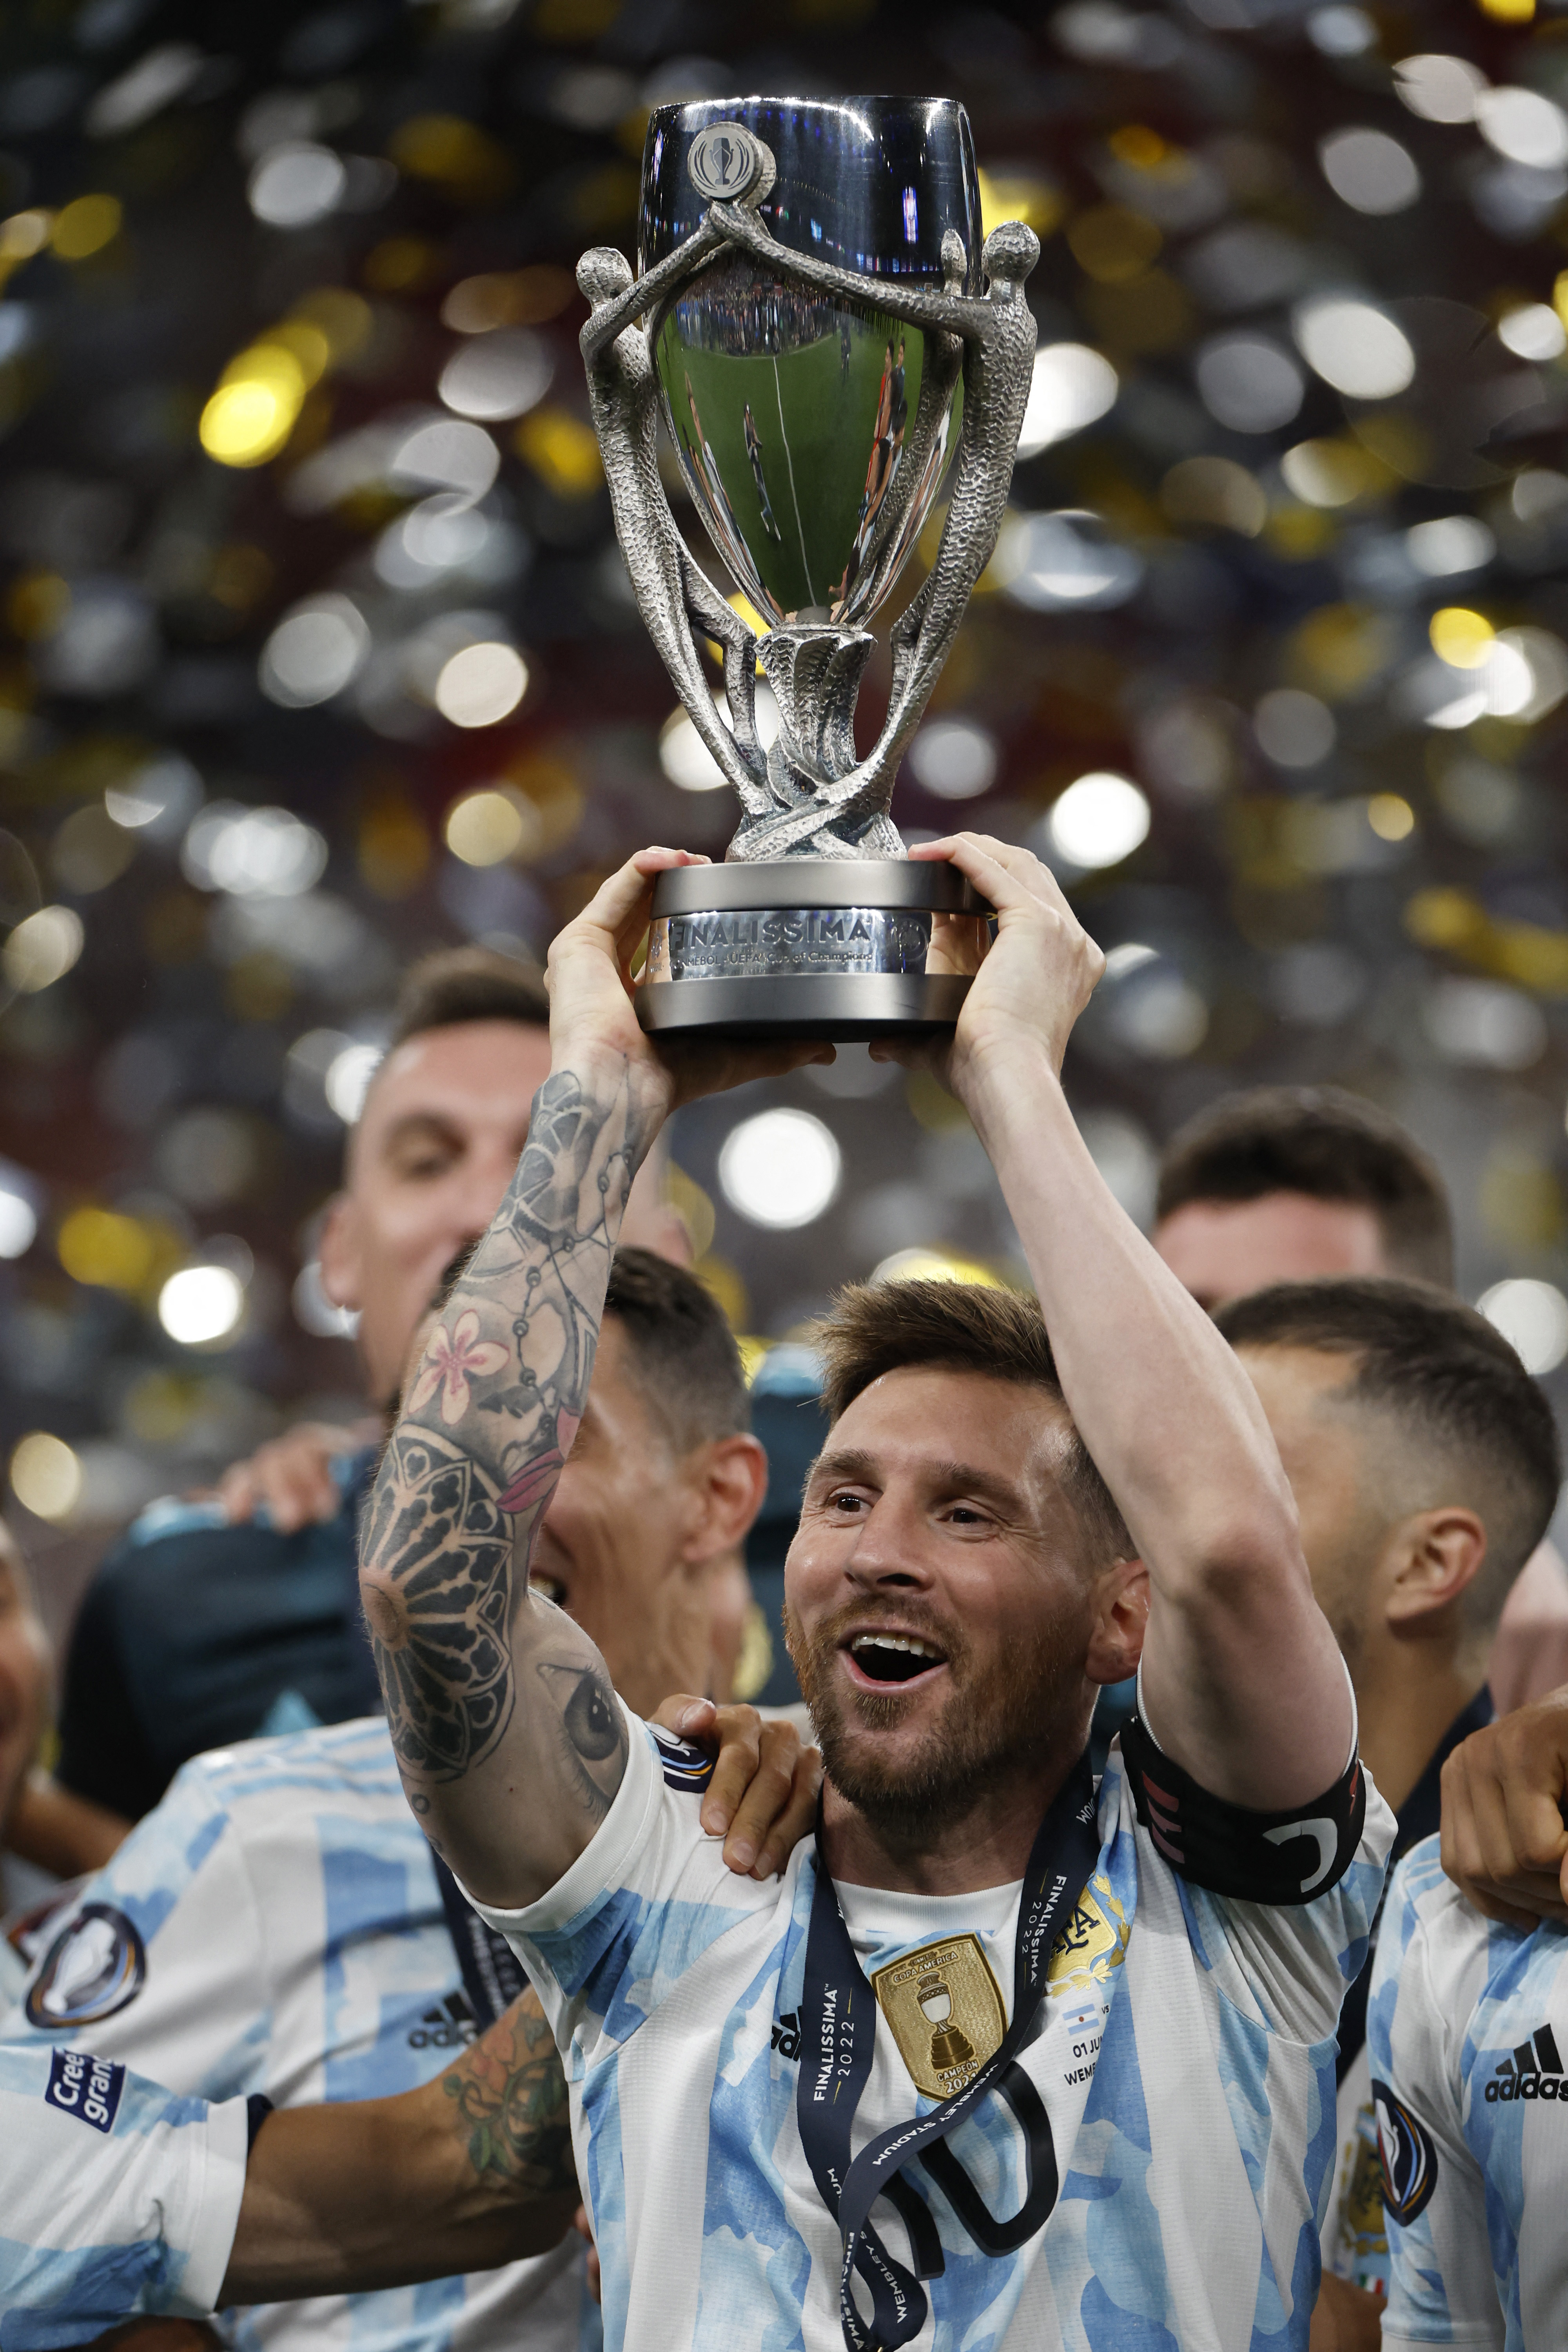 Lionel Messi is the most successful Argentine footballer in history (REUTERS/Peter Cziborra)